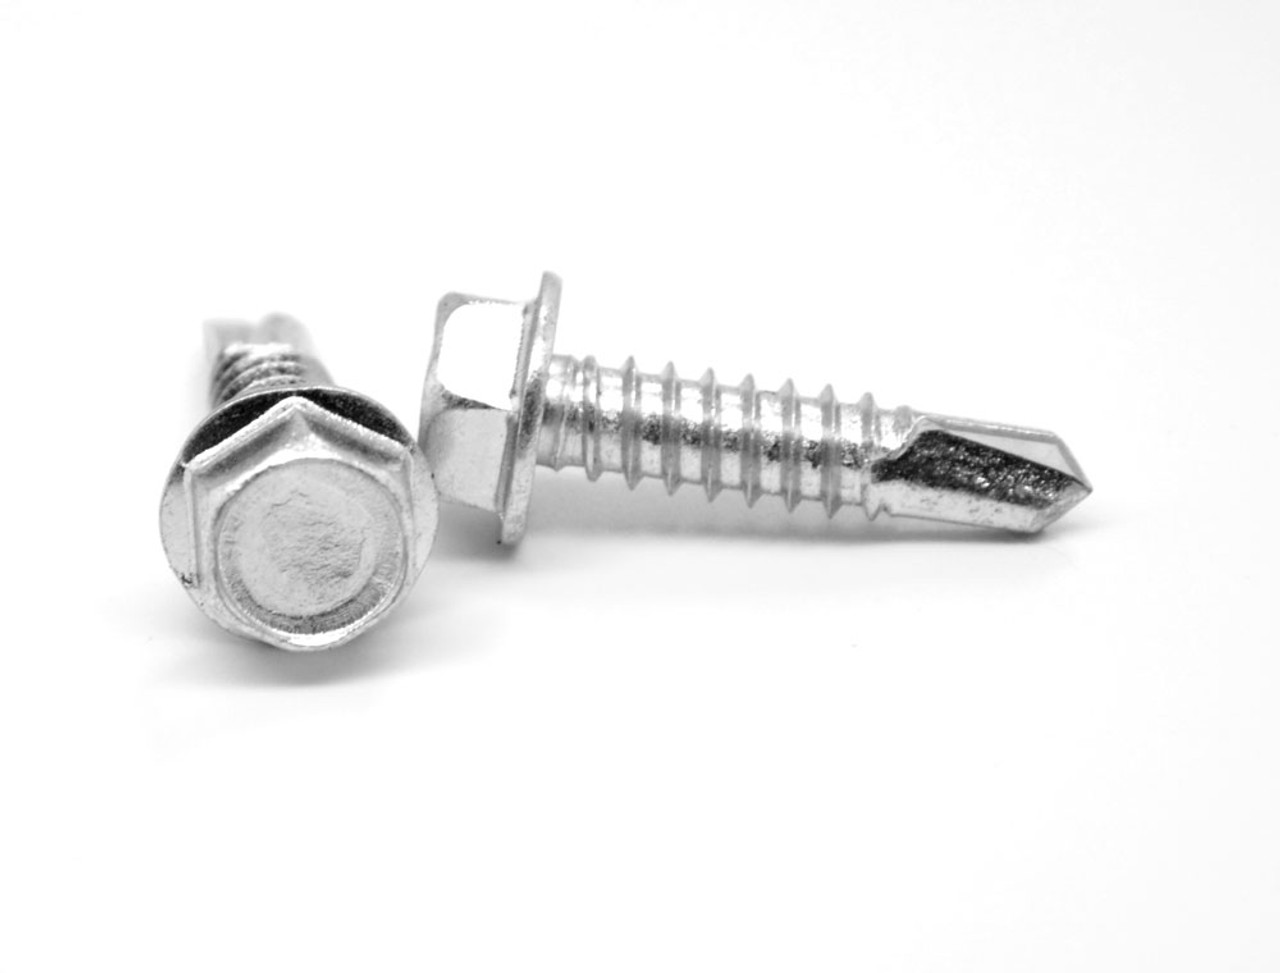 #8-18 x 1 1/2" (FT) Self Drilling Screw Hex Washer Head #2 Point Stainless Steel 410